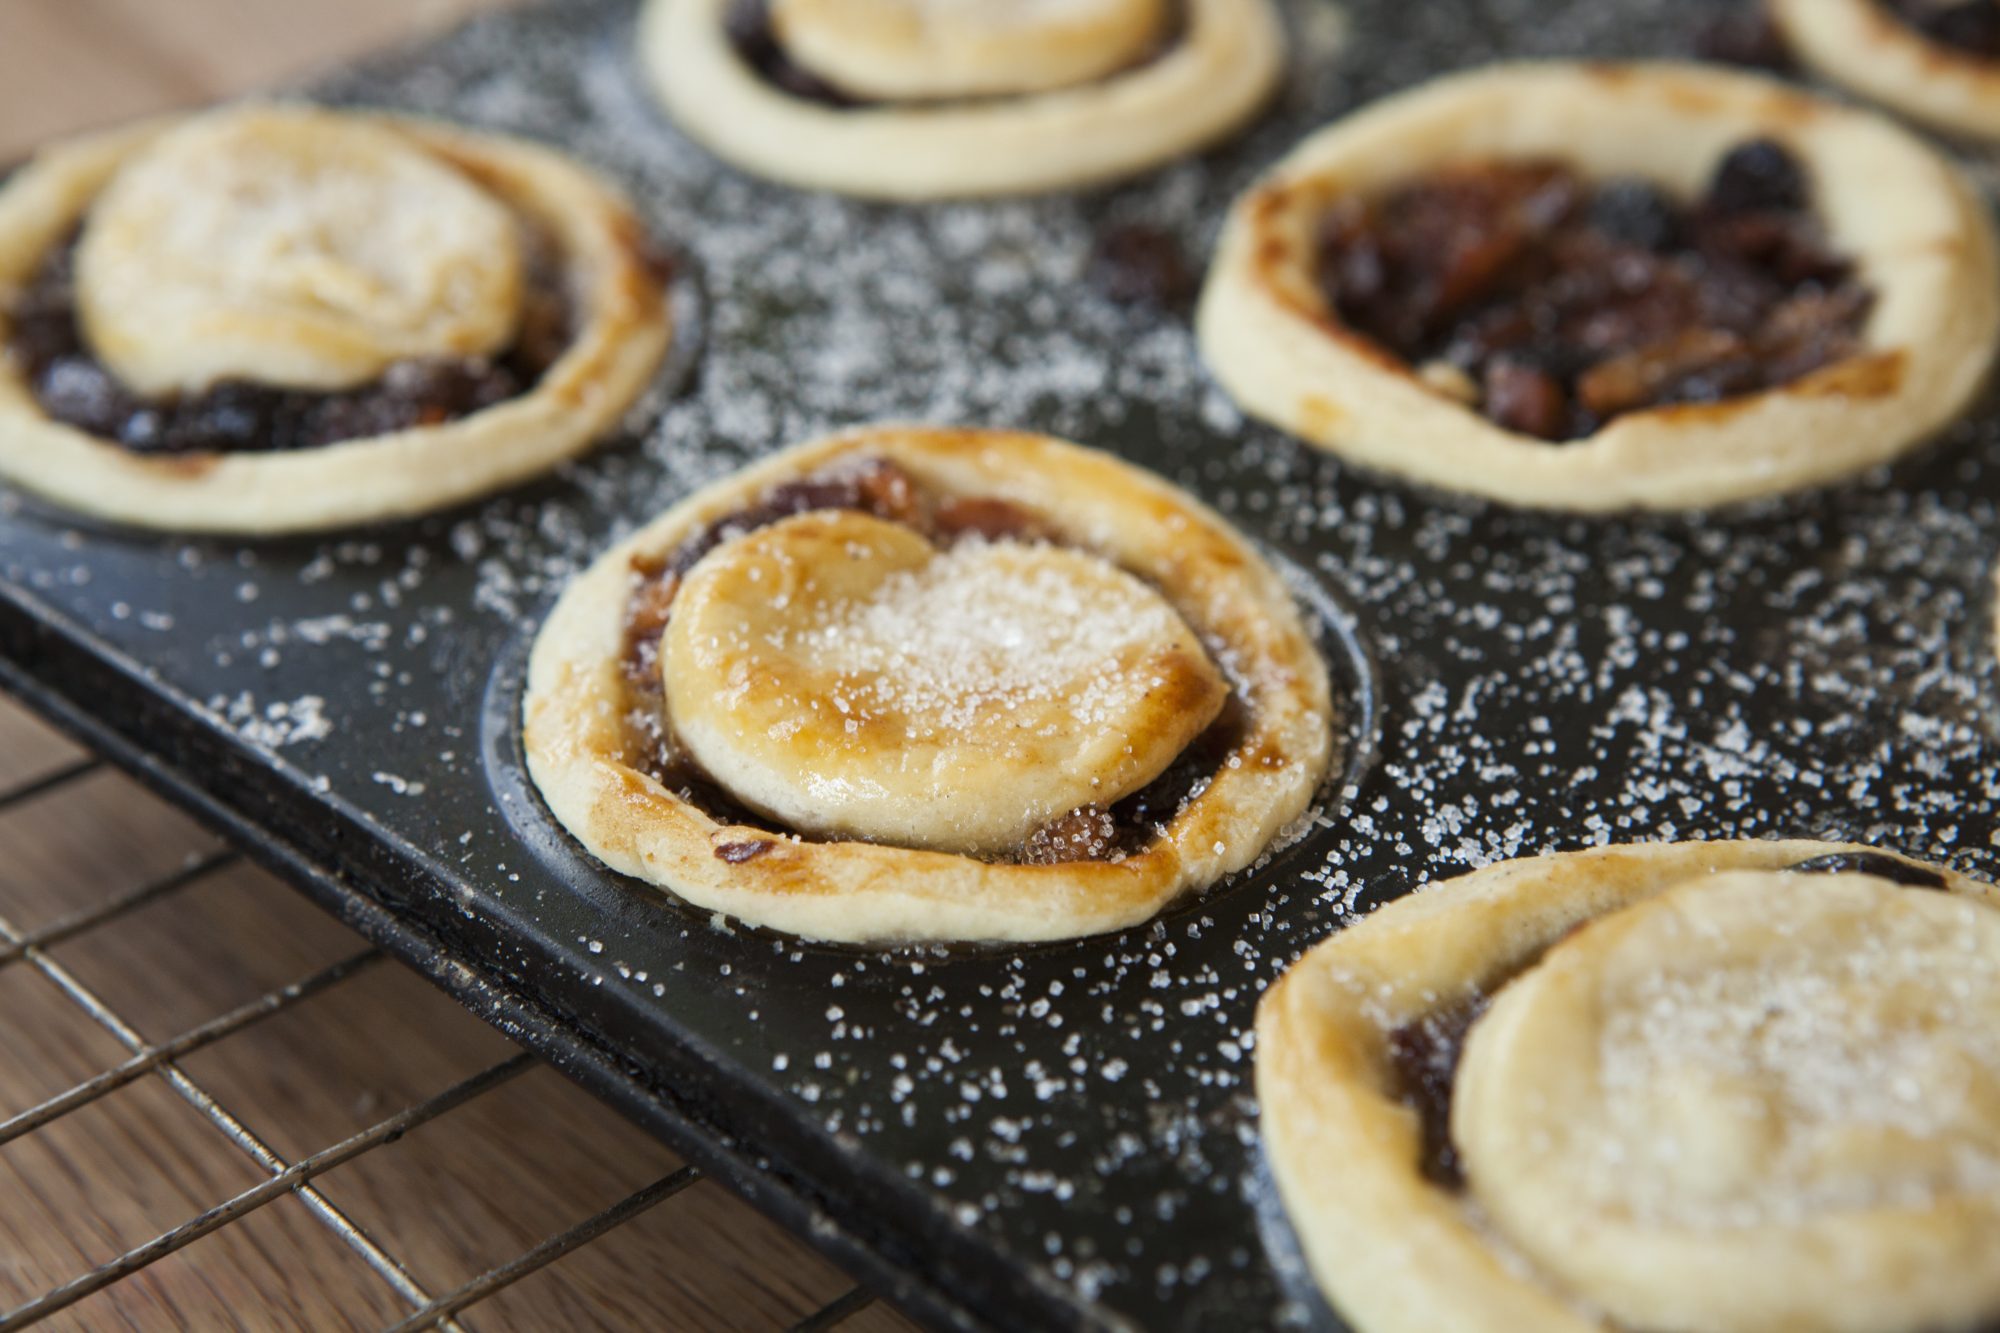 Mince pies pan Getty 7/1/20